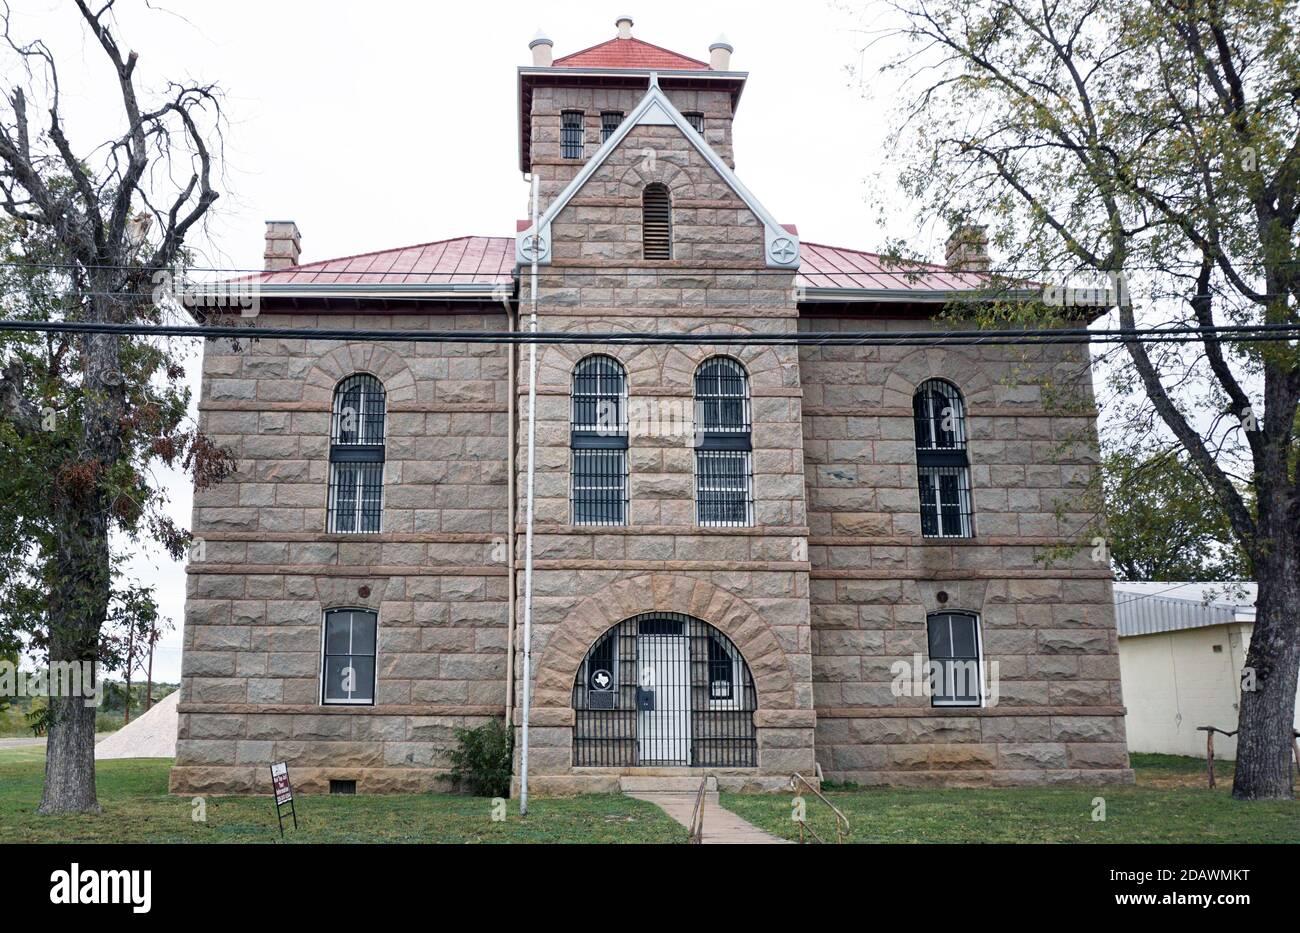 Liano,Texas - Nov. 11,2020  Old Liano County Red Top Jail built in 1895. Stock Photo